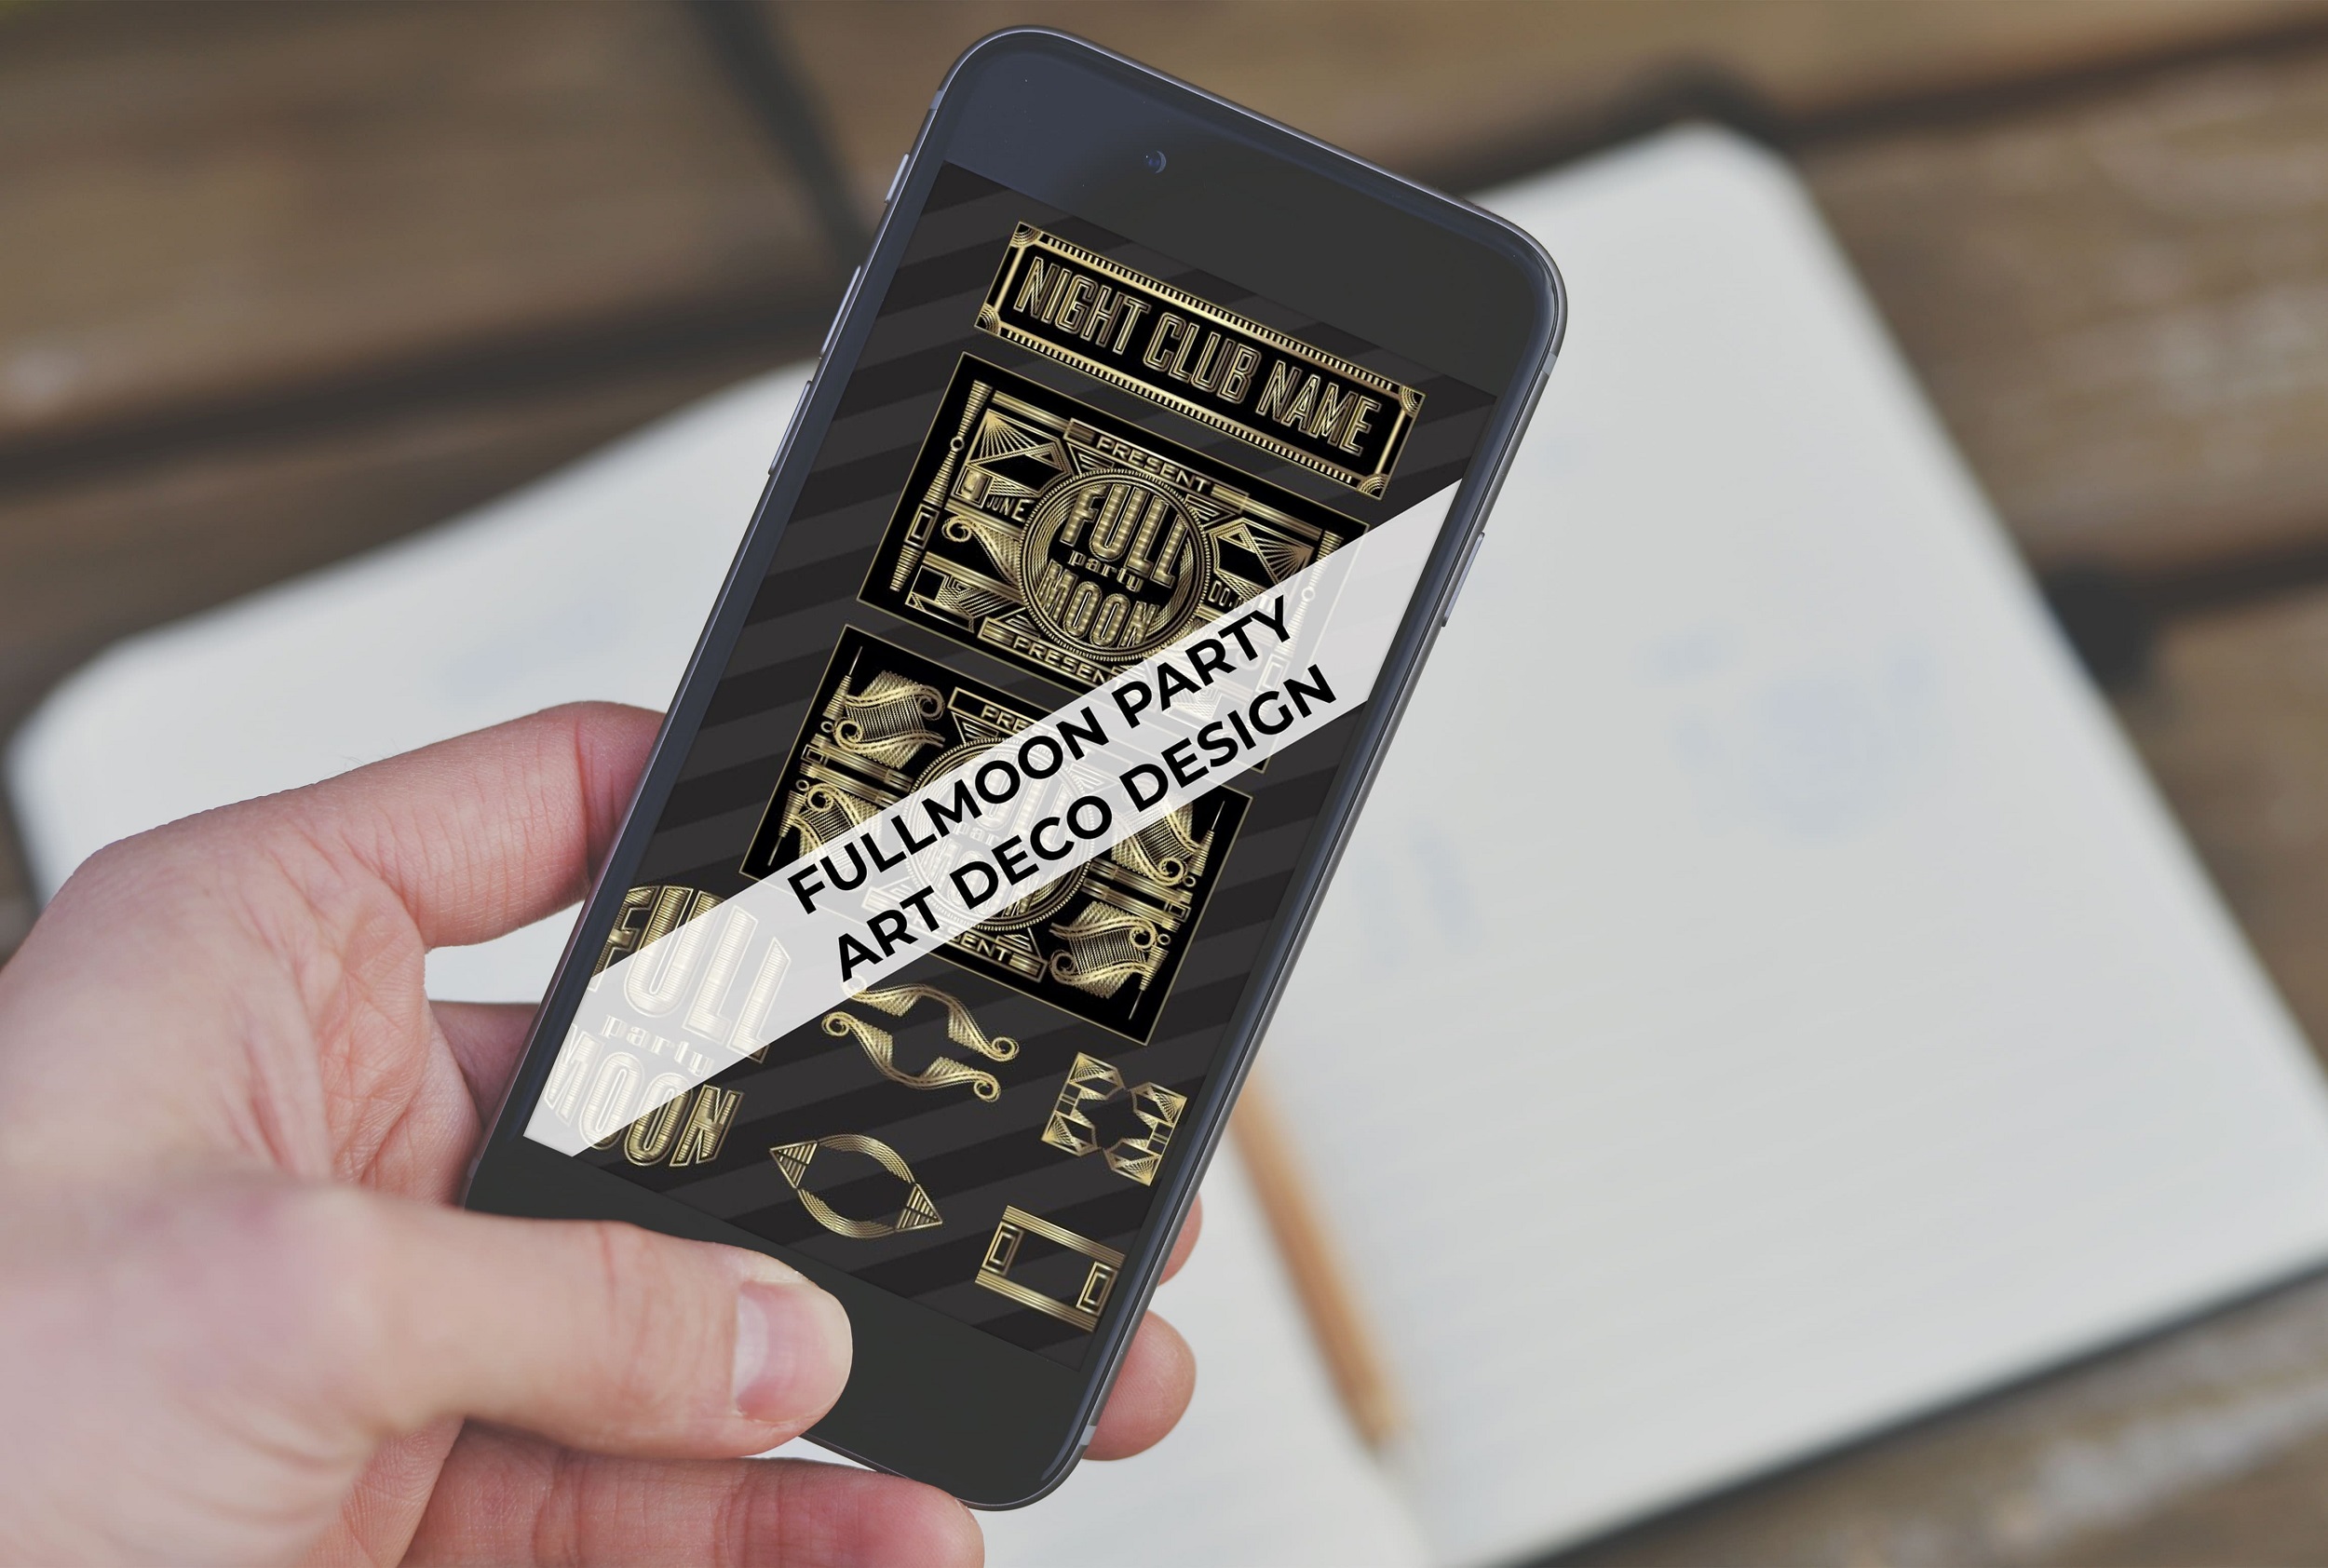 gatsby 1920 gold foil party clip art phone mockup.